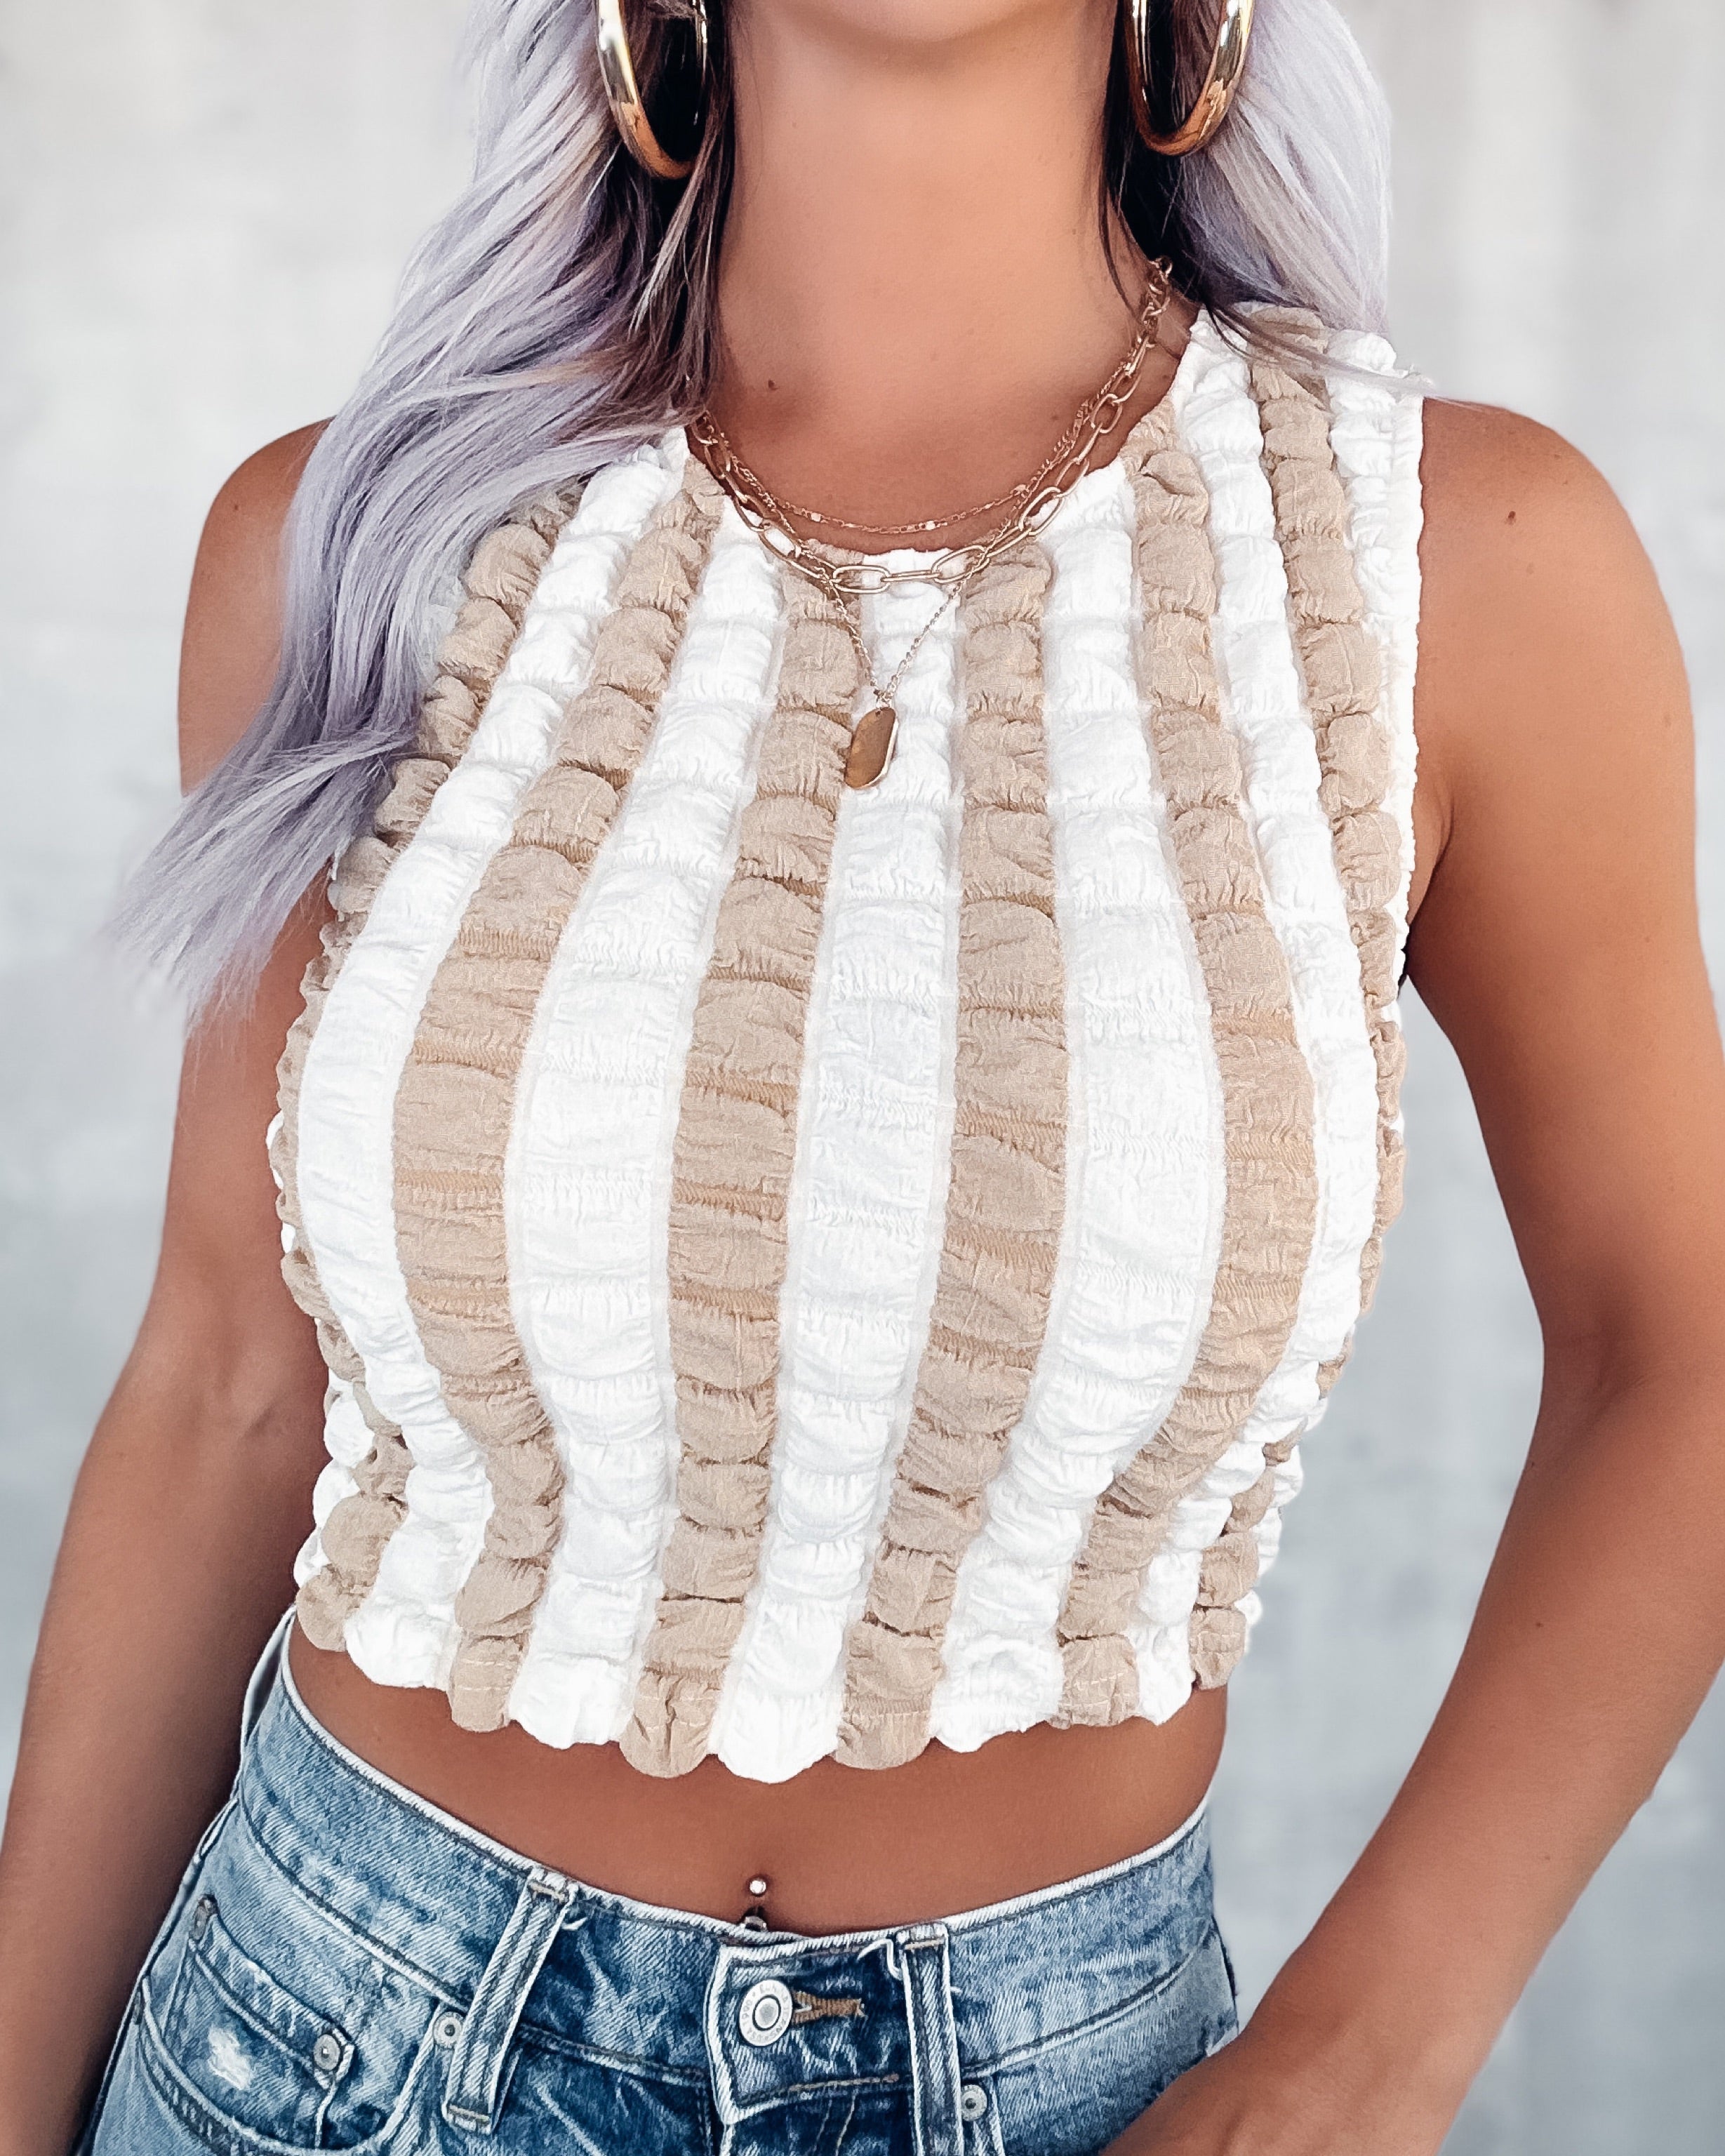 Textured Bliss Sleeveless Top - White/Taupe